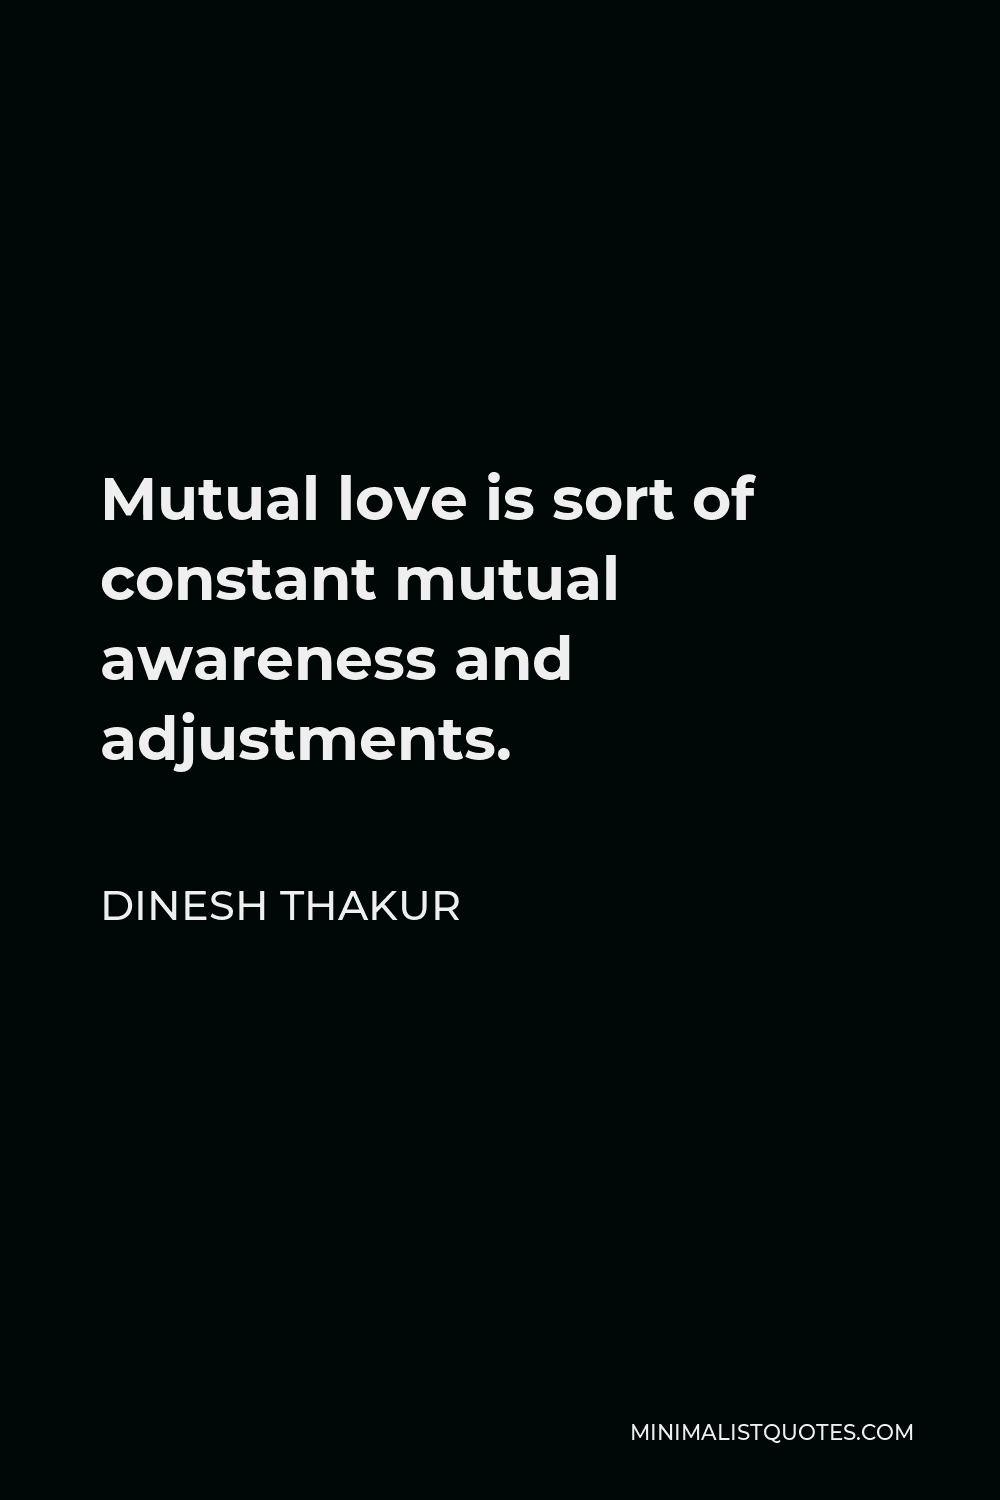 Dinesh Thakur Quote - Mutual love is sort of constant mutual awareness and adjustments.